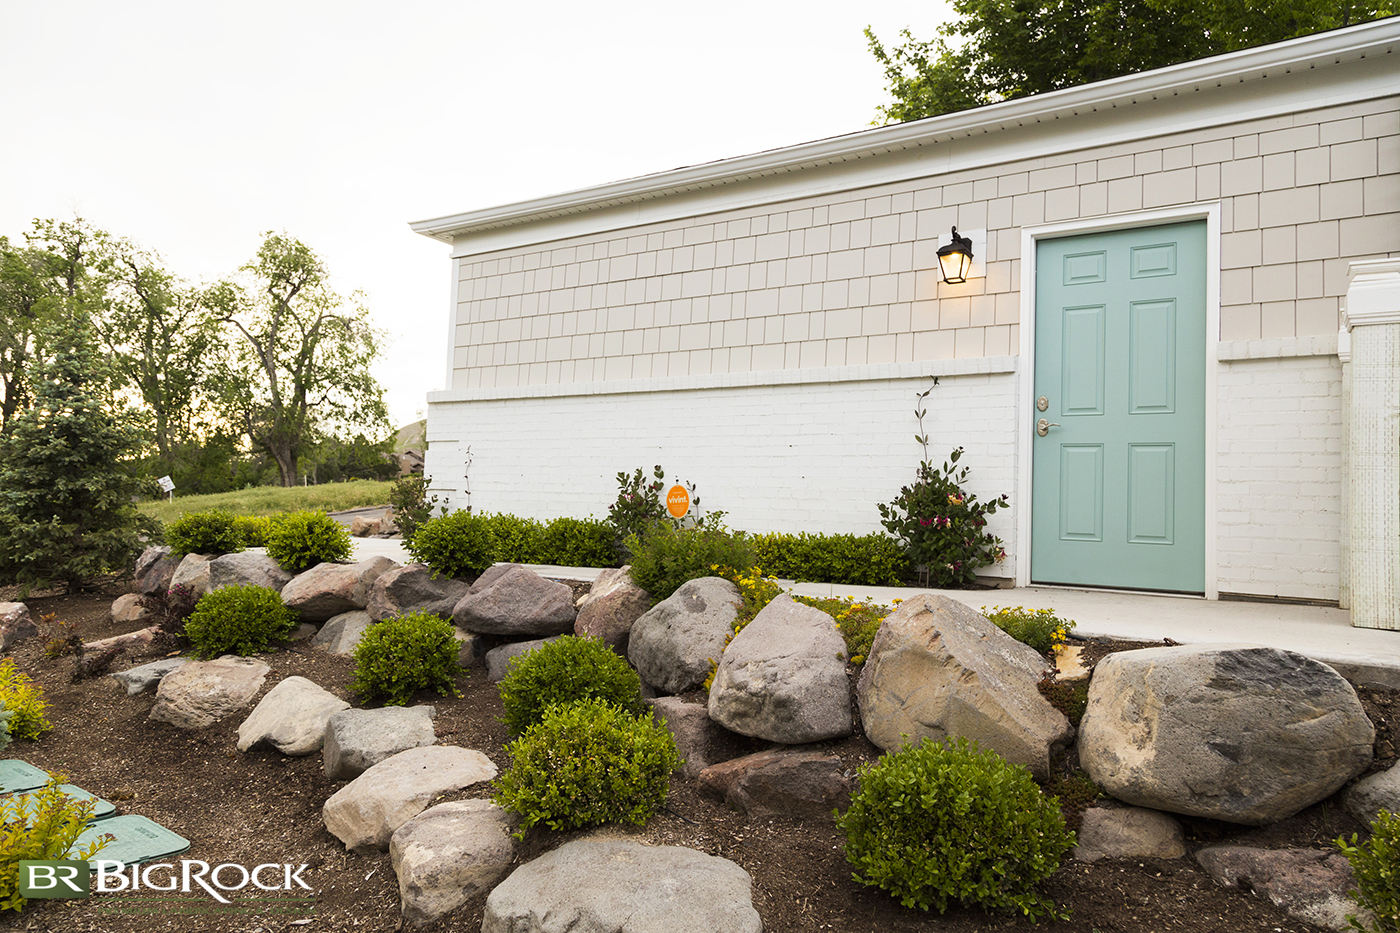 The perfect rock for your yard depends on what your plans are for the rock and the space. There are many different landscaping rocks including bricks, flagstone, cobblestone, boulders, river rock, lava rock, beach pebbles, pea gravel, or crushed granite.